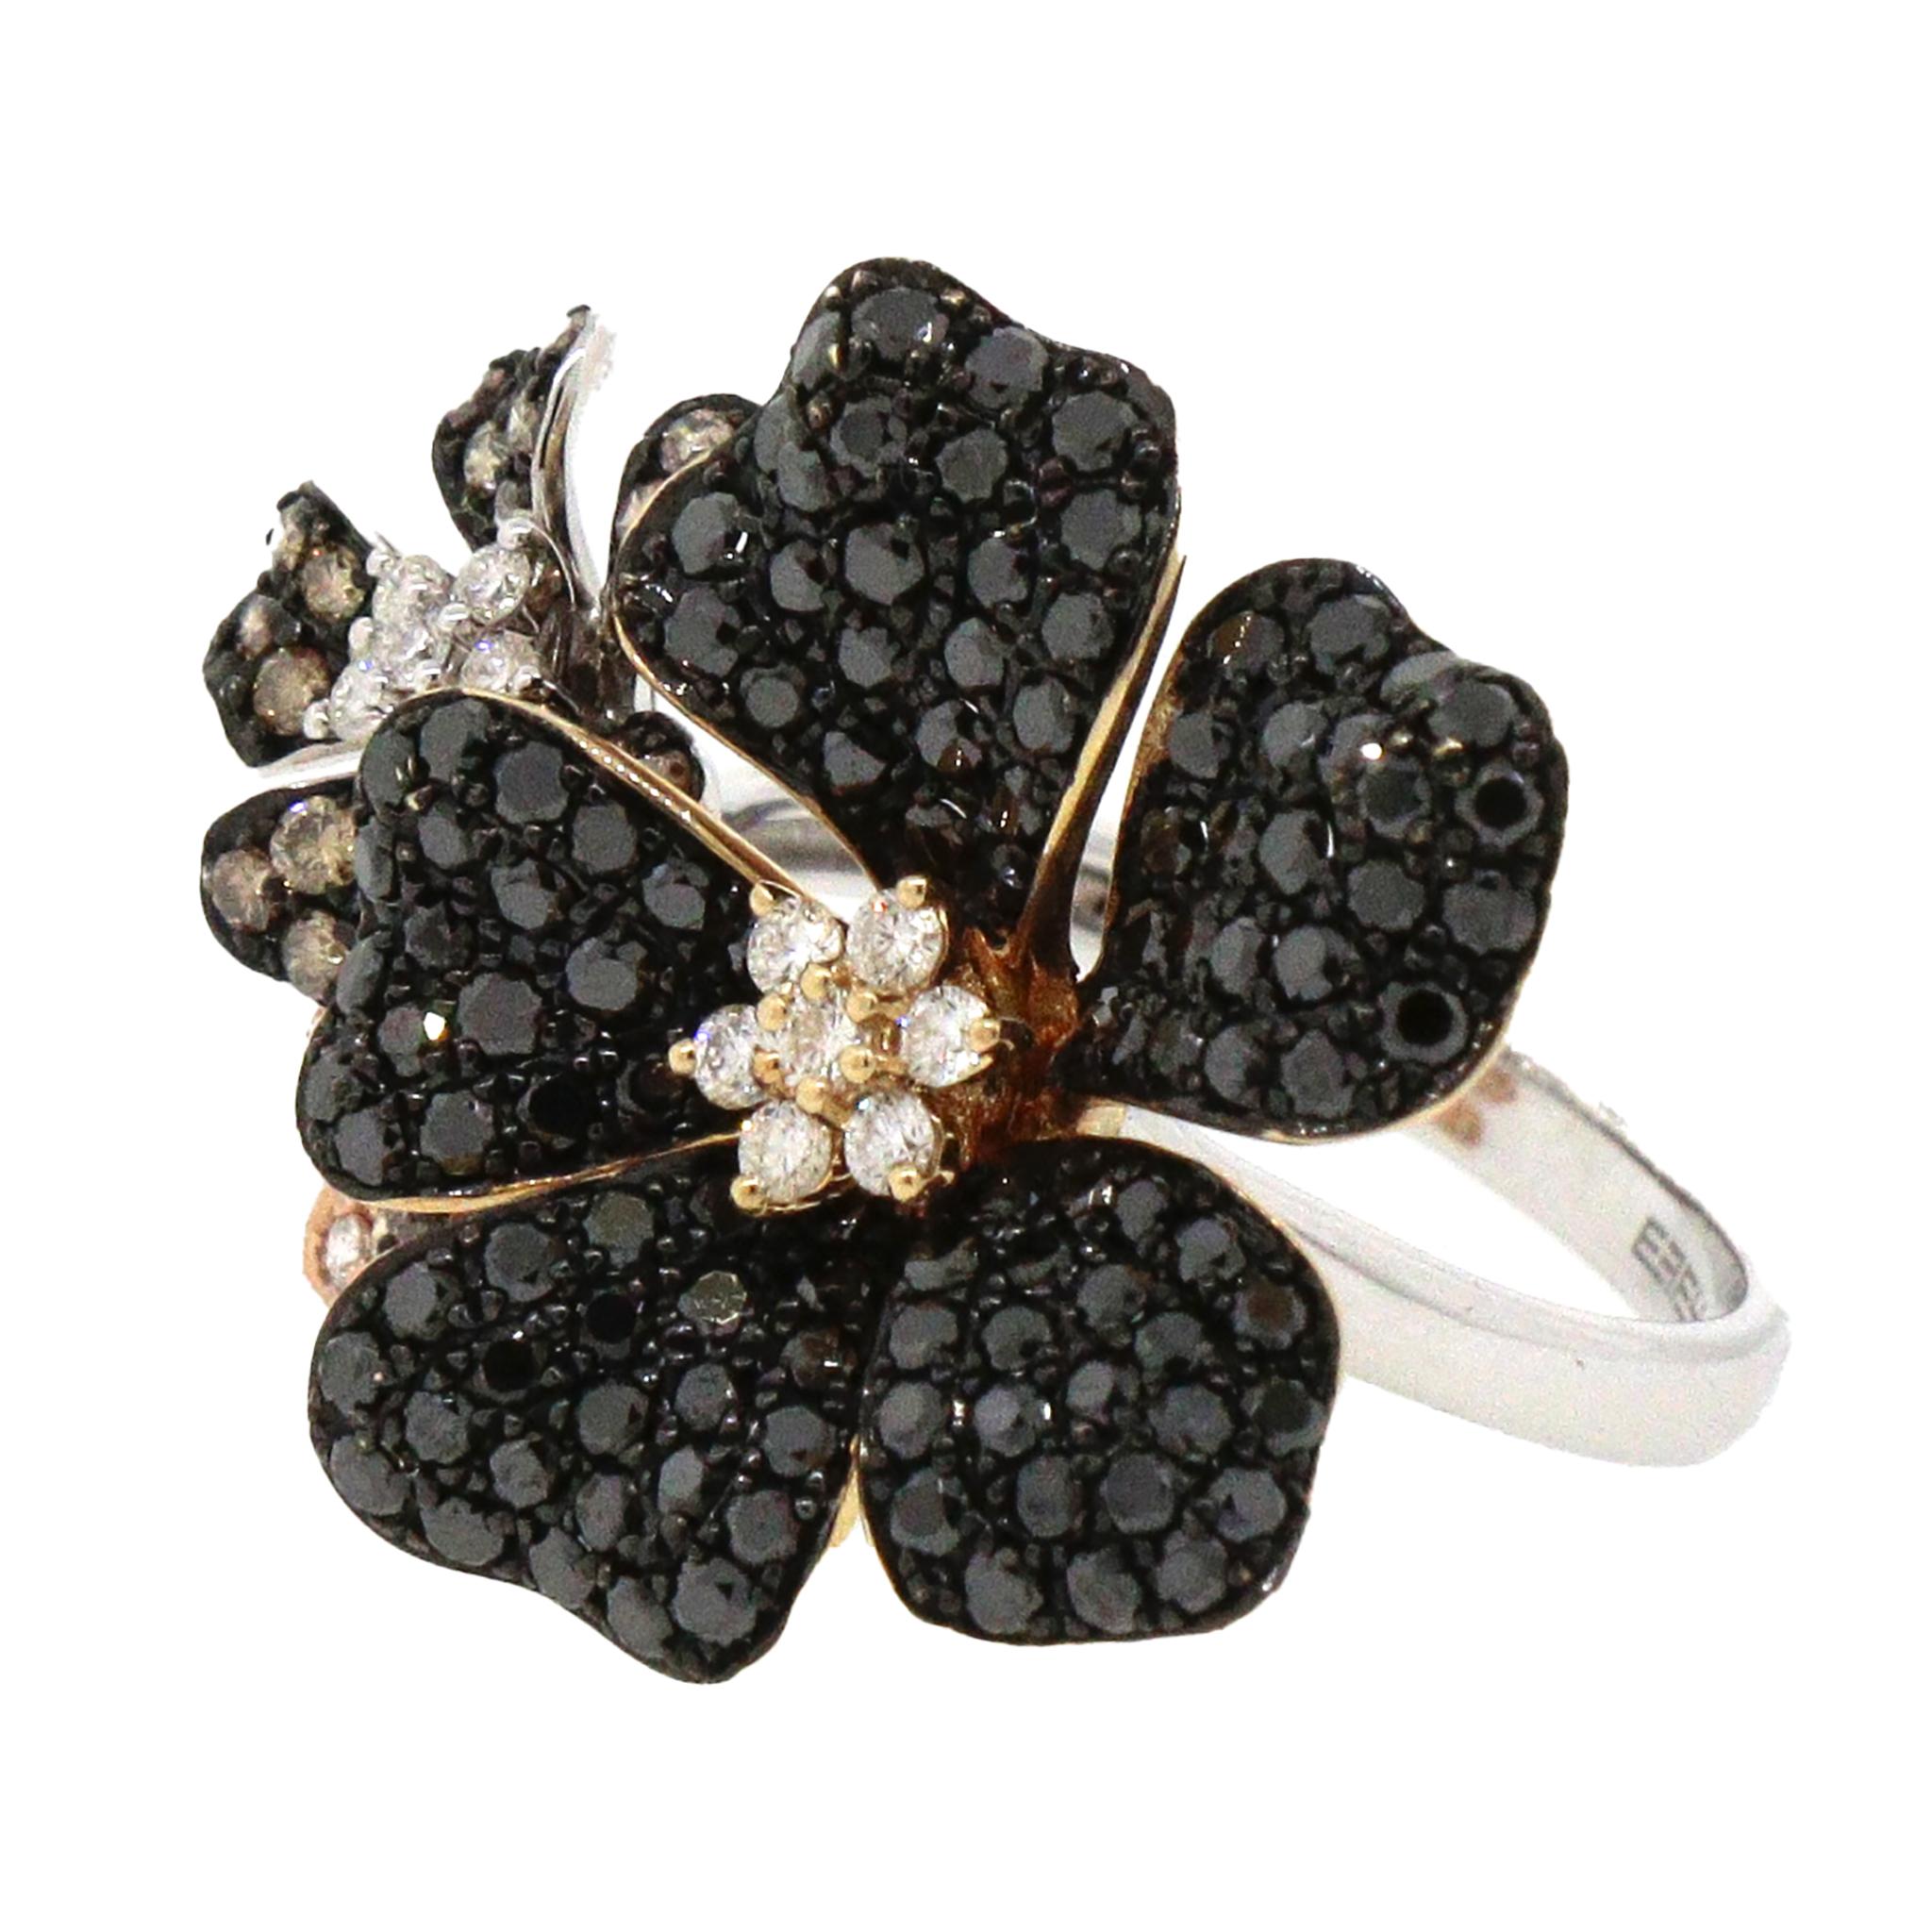 14k Yellow Gold
Black, Espresso and White Diamonds
Approximate: 2.04 ct twd
Ring Size: 7.25
Total Weight: 6.2 grams
Preowned